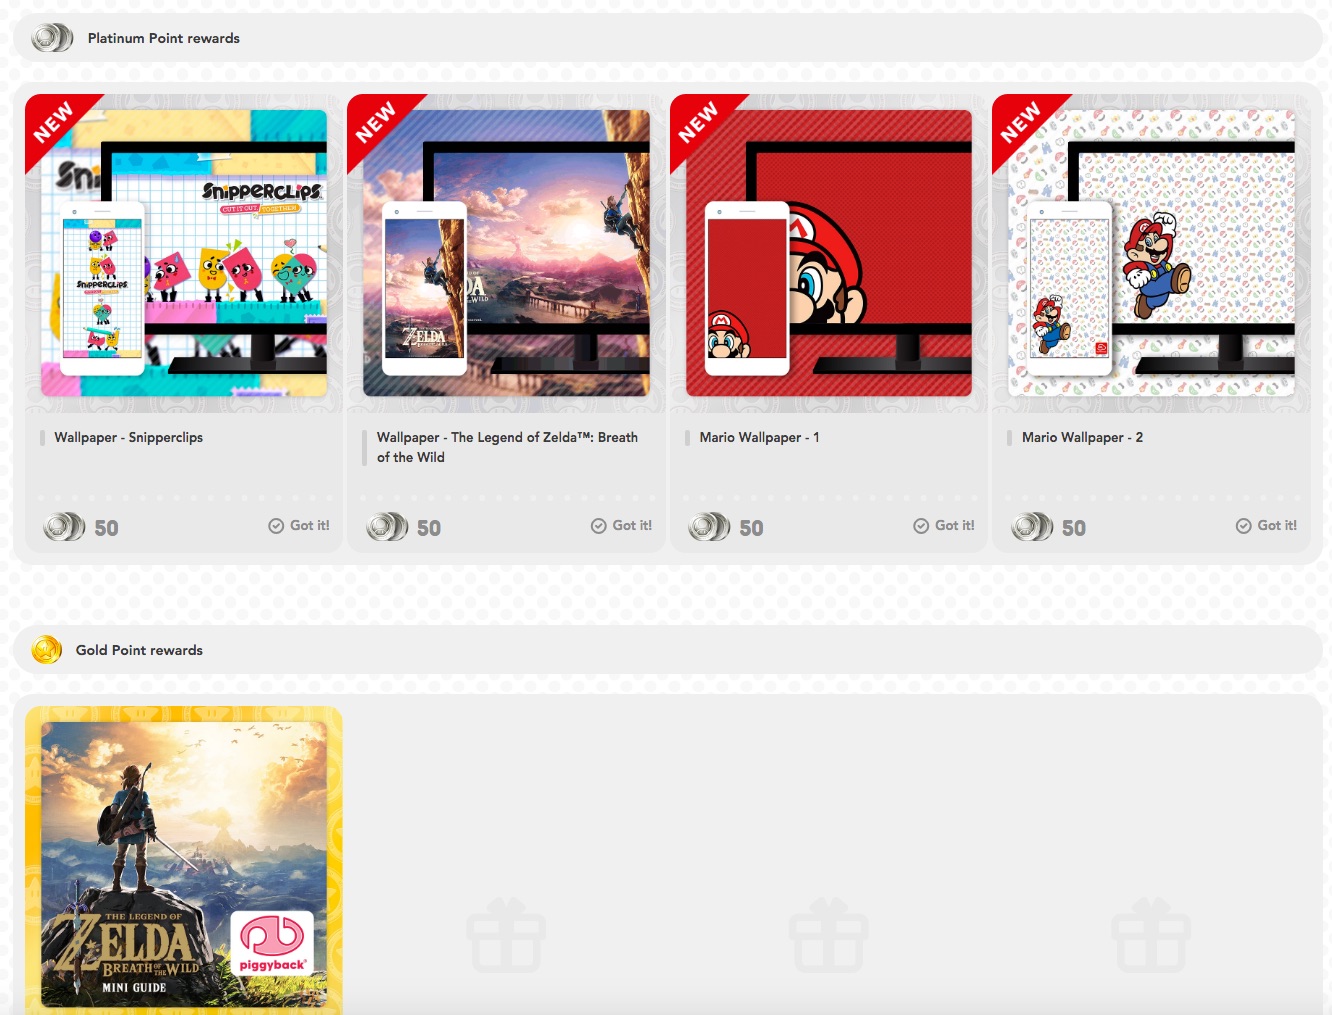 New My Nintendo digital rewards are available at My Nintendo